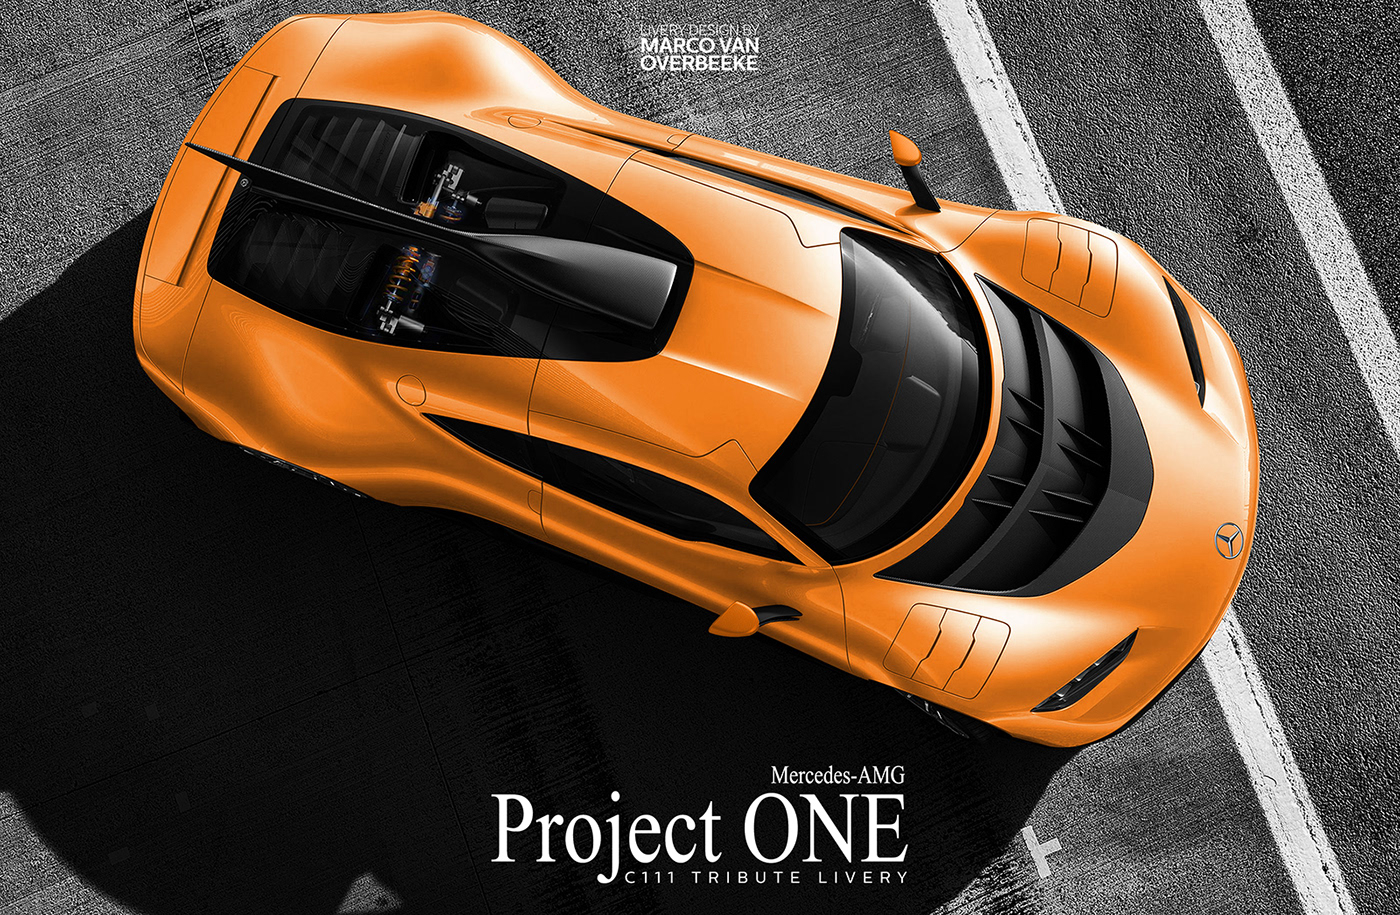 mercedes mercedes-benz ProjectOne project one AMG c111 concept Livery tribute Freelance